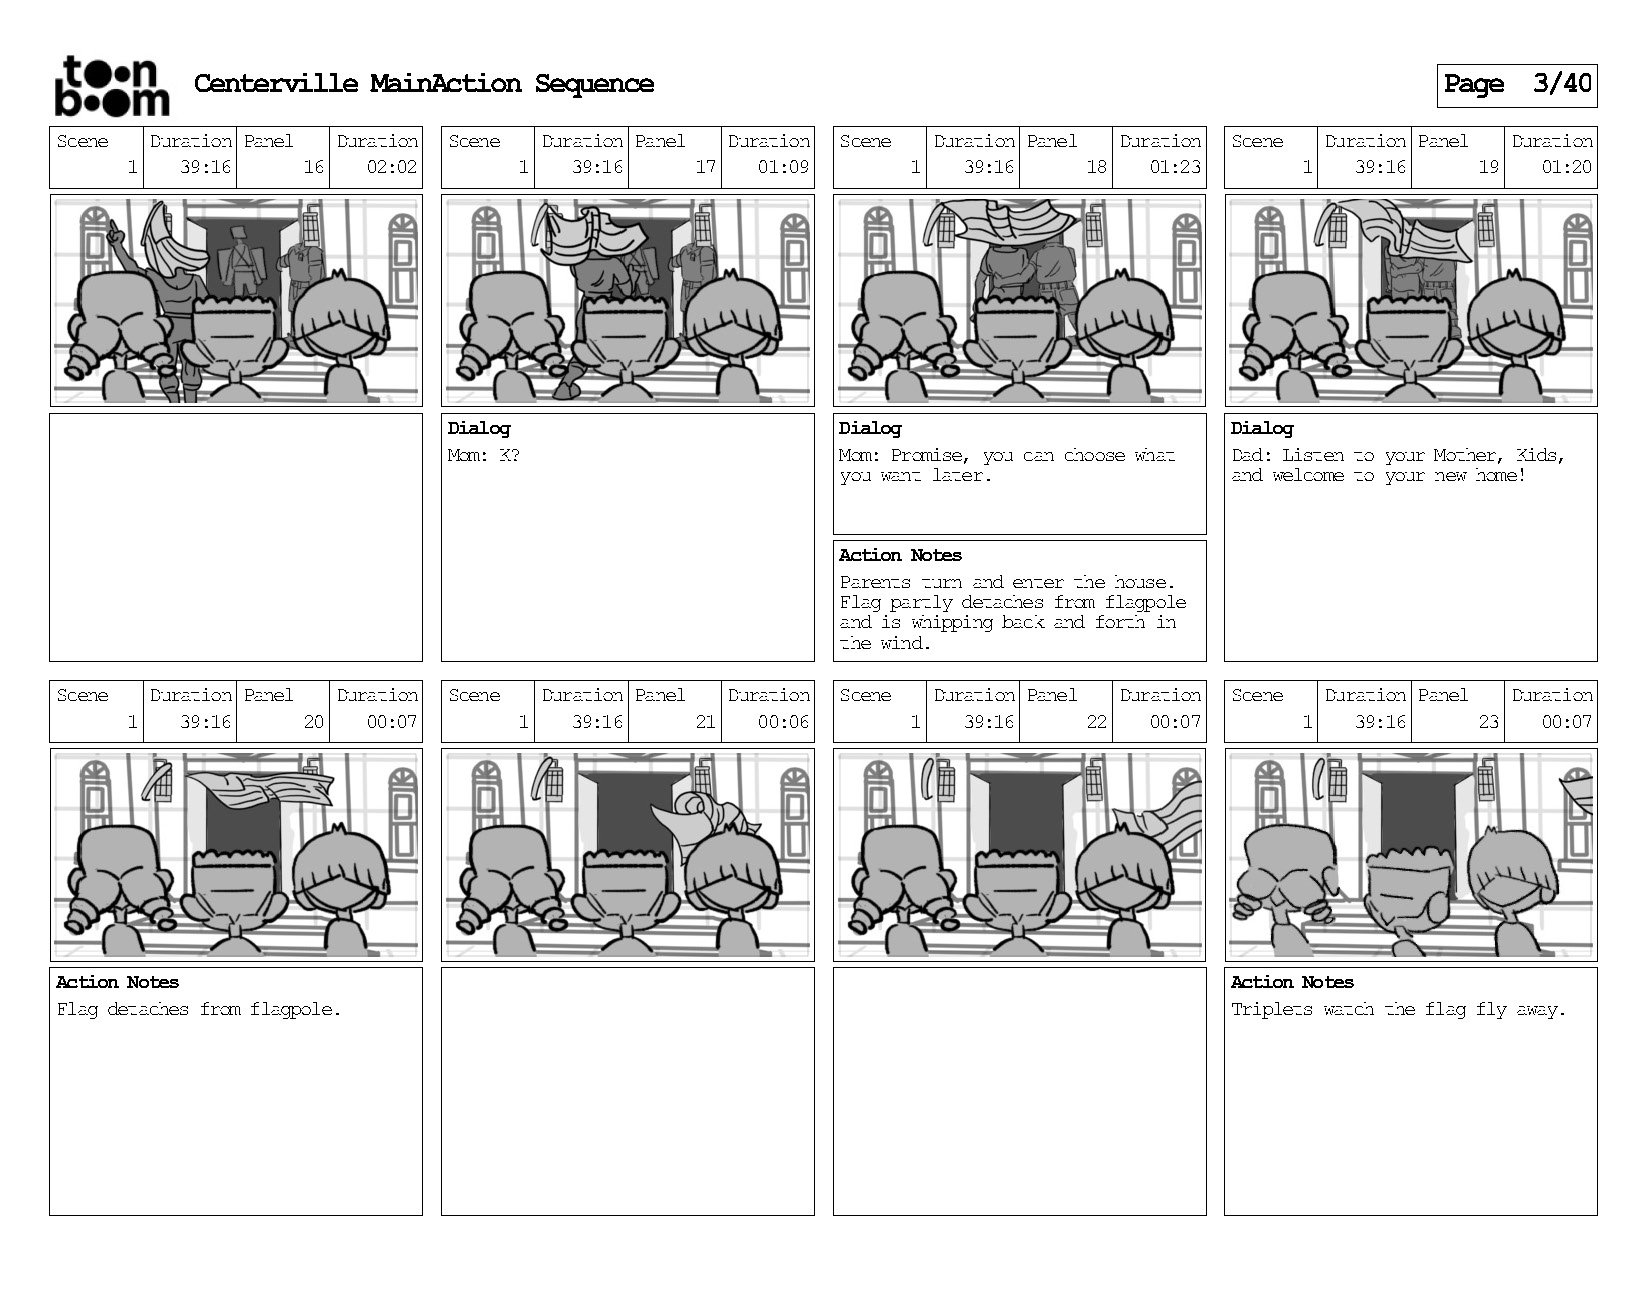 Centerville_movingInSequence_V05_Page_04.jpg